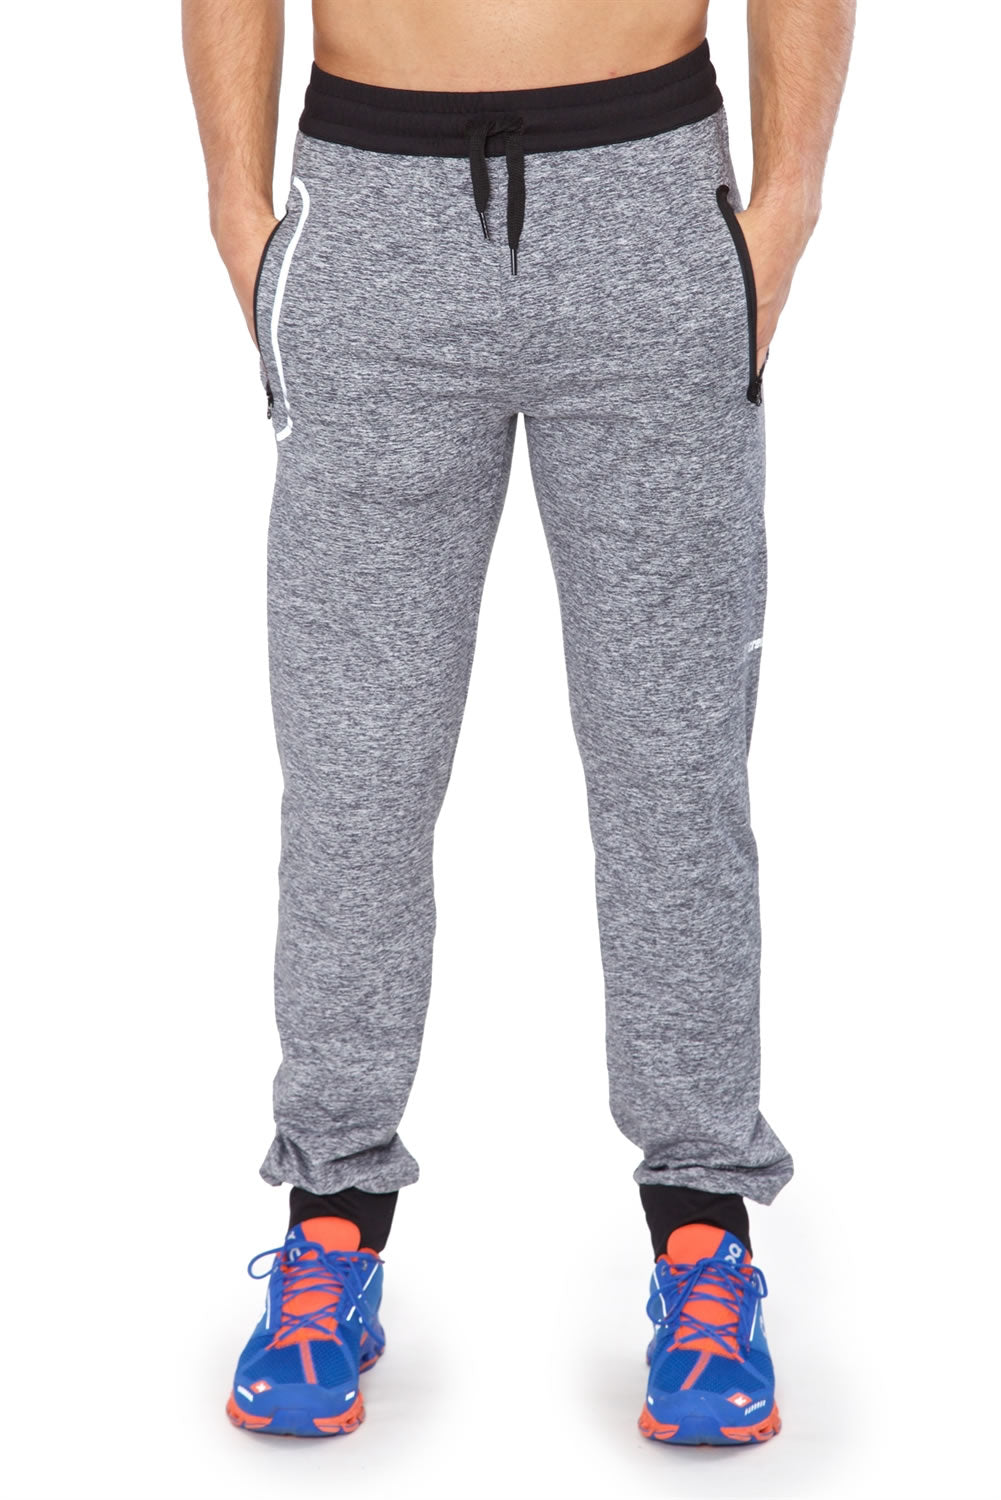 The No Bother Pant (Men's)